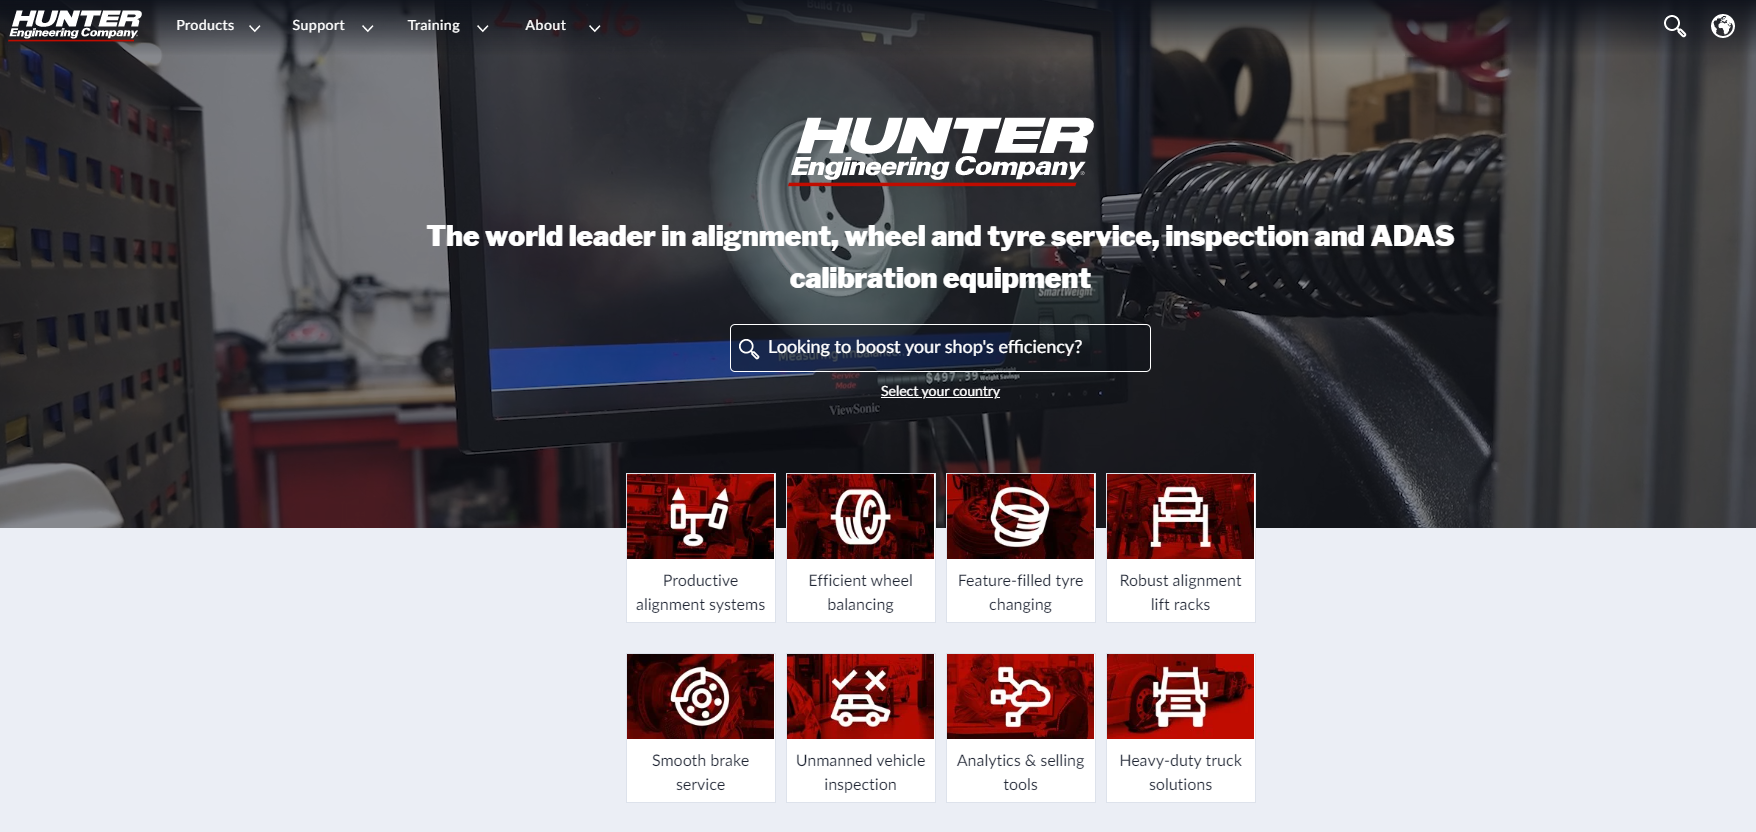 The mechanical engineering website Hunter stands out with the video and the services icons